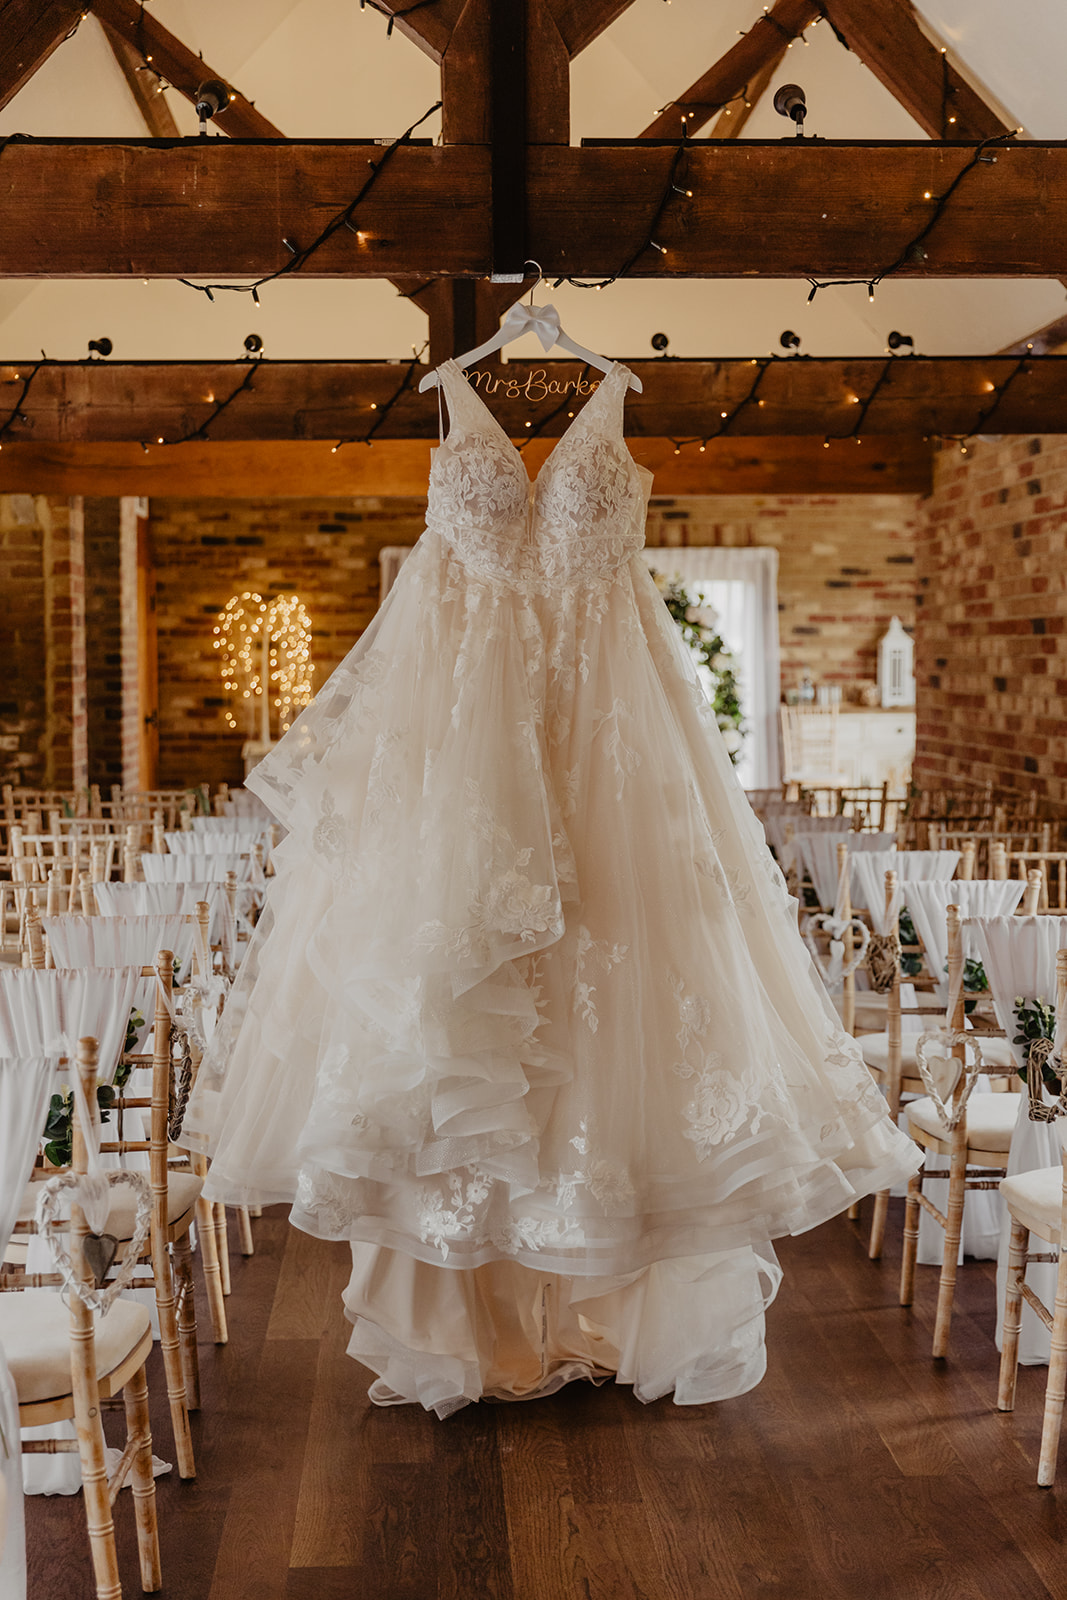 Wedding dress hanging up at a Long Furlong Barn Wedding in Worthing, Sussex. By Olive Joy Photography.